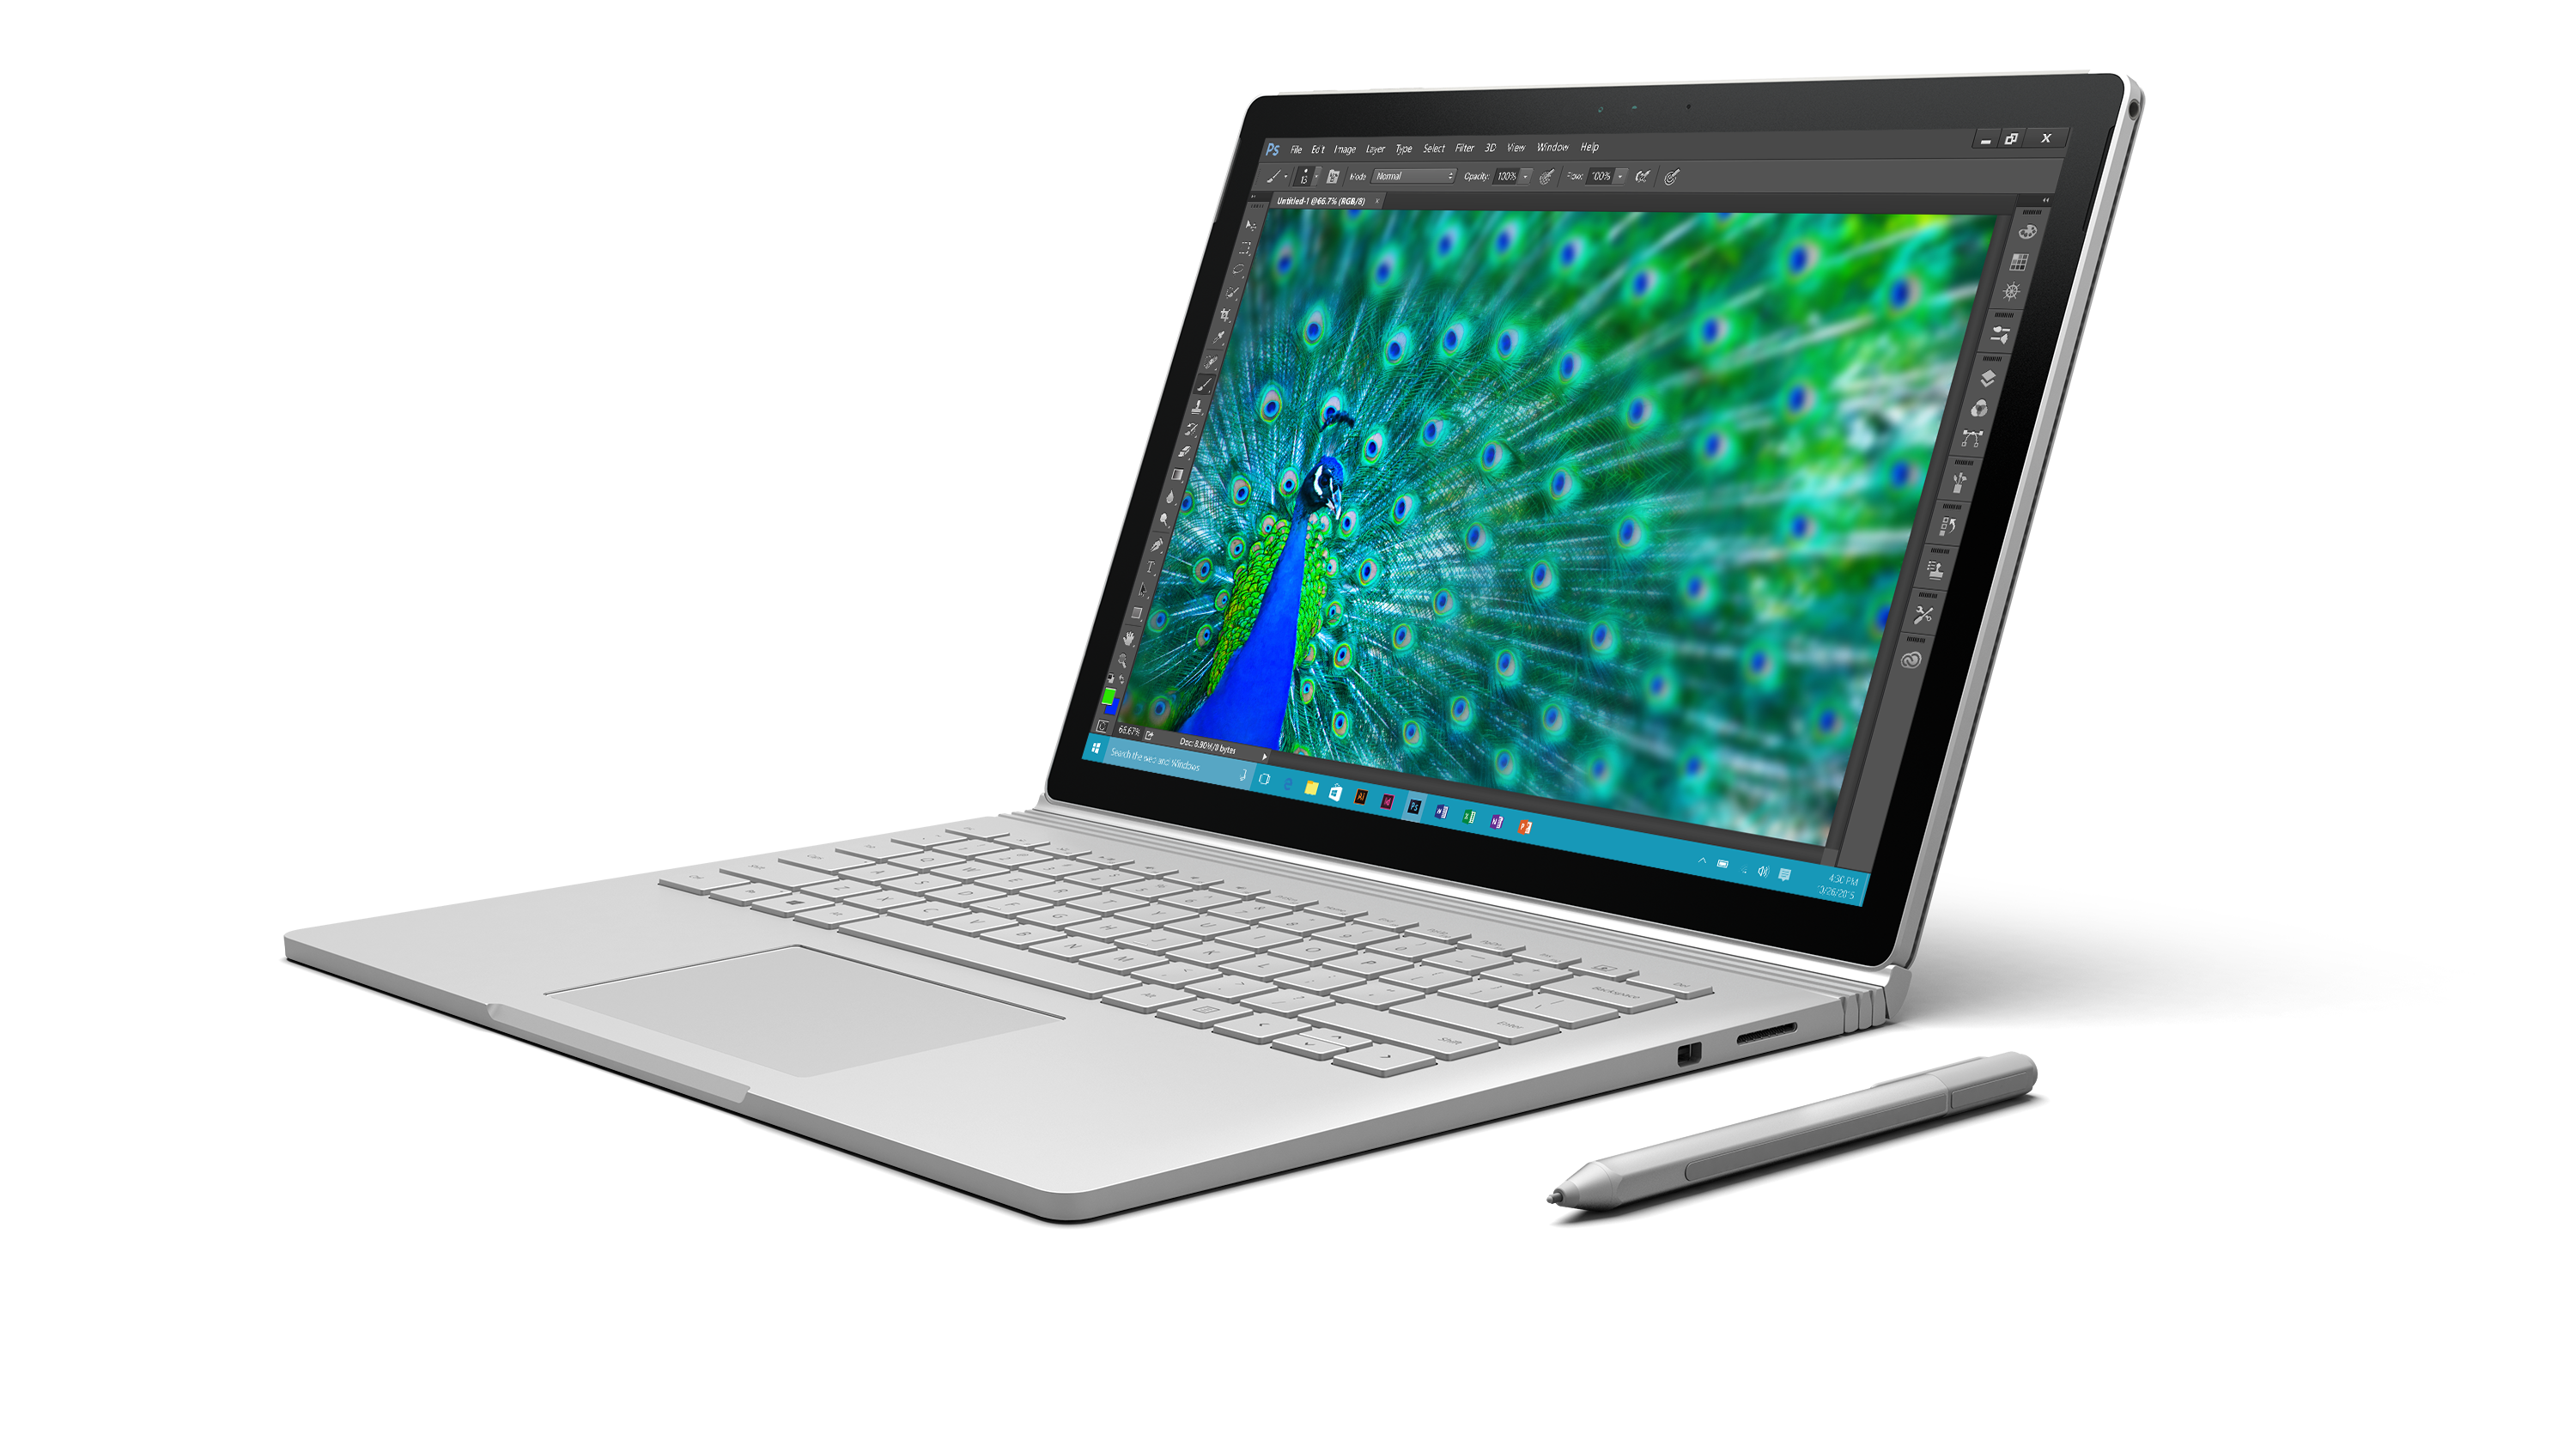 Microsoft Surface Book shown with Surface Pen.